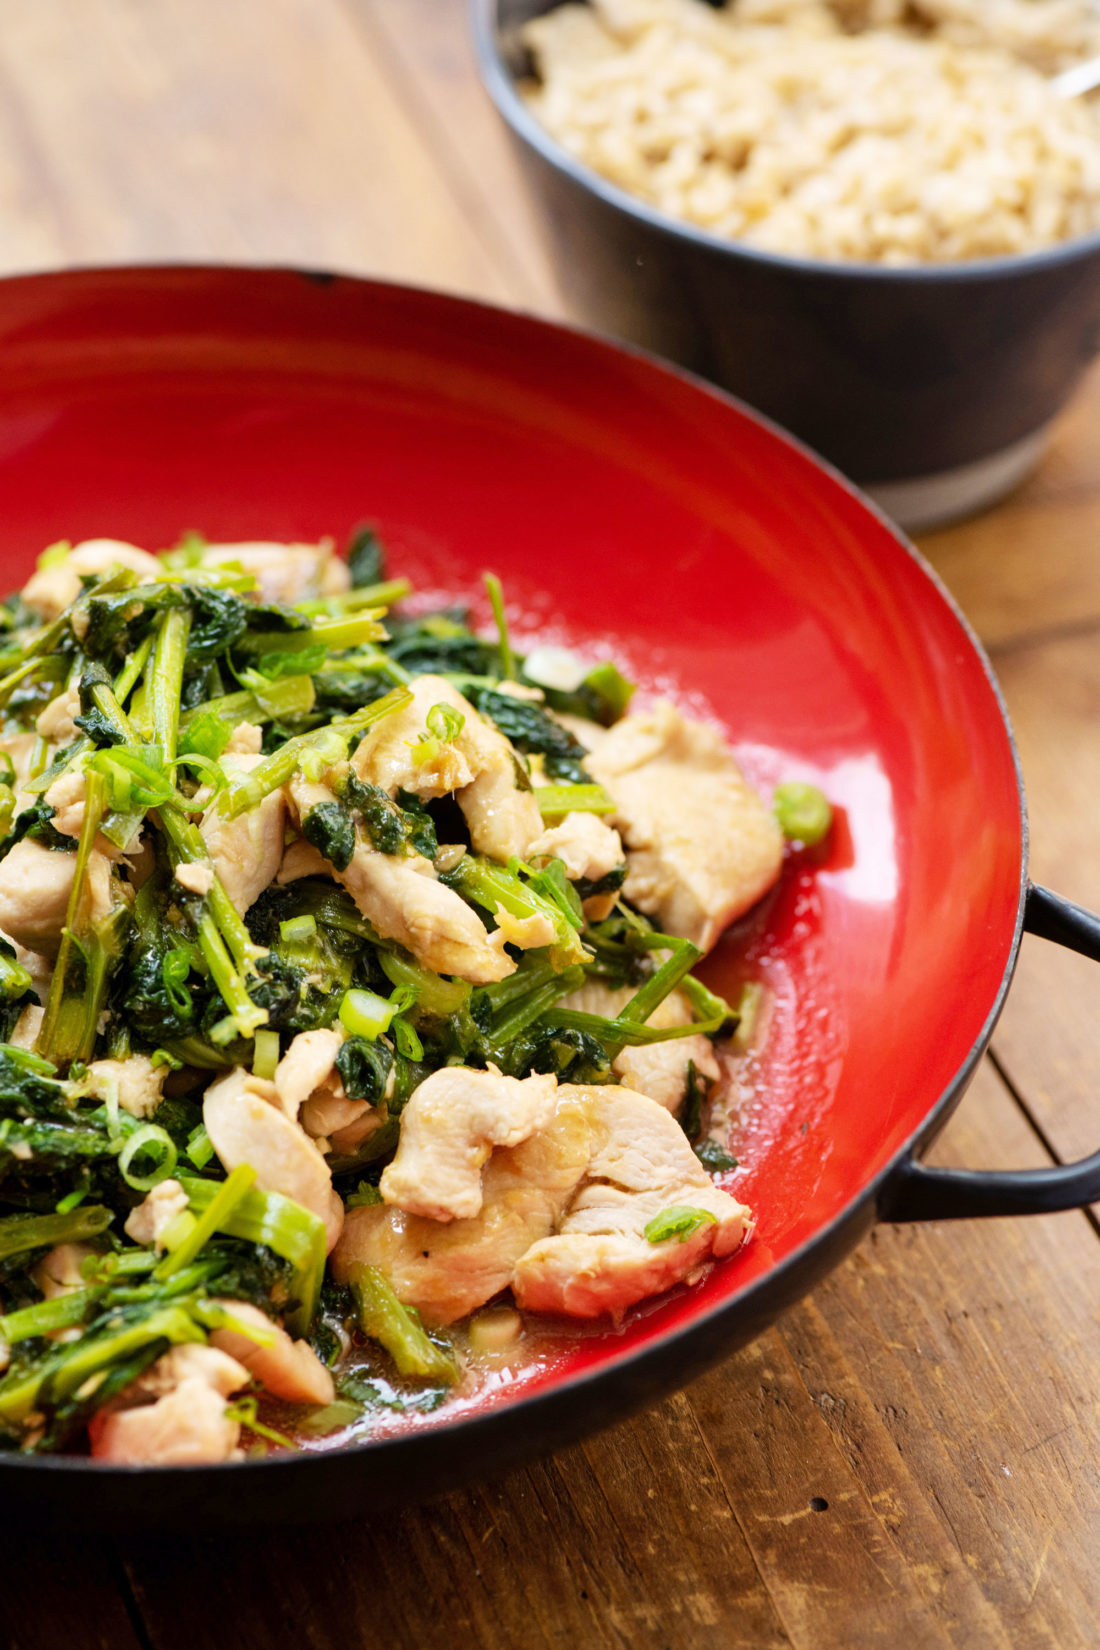 Stir fried chicken with pea shoots in a red bowl.